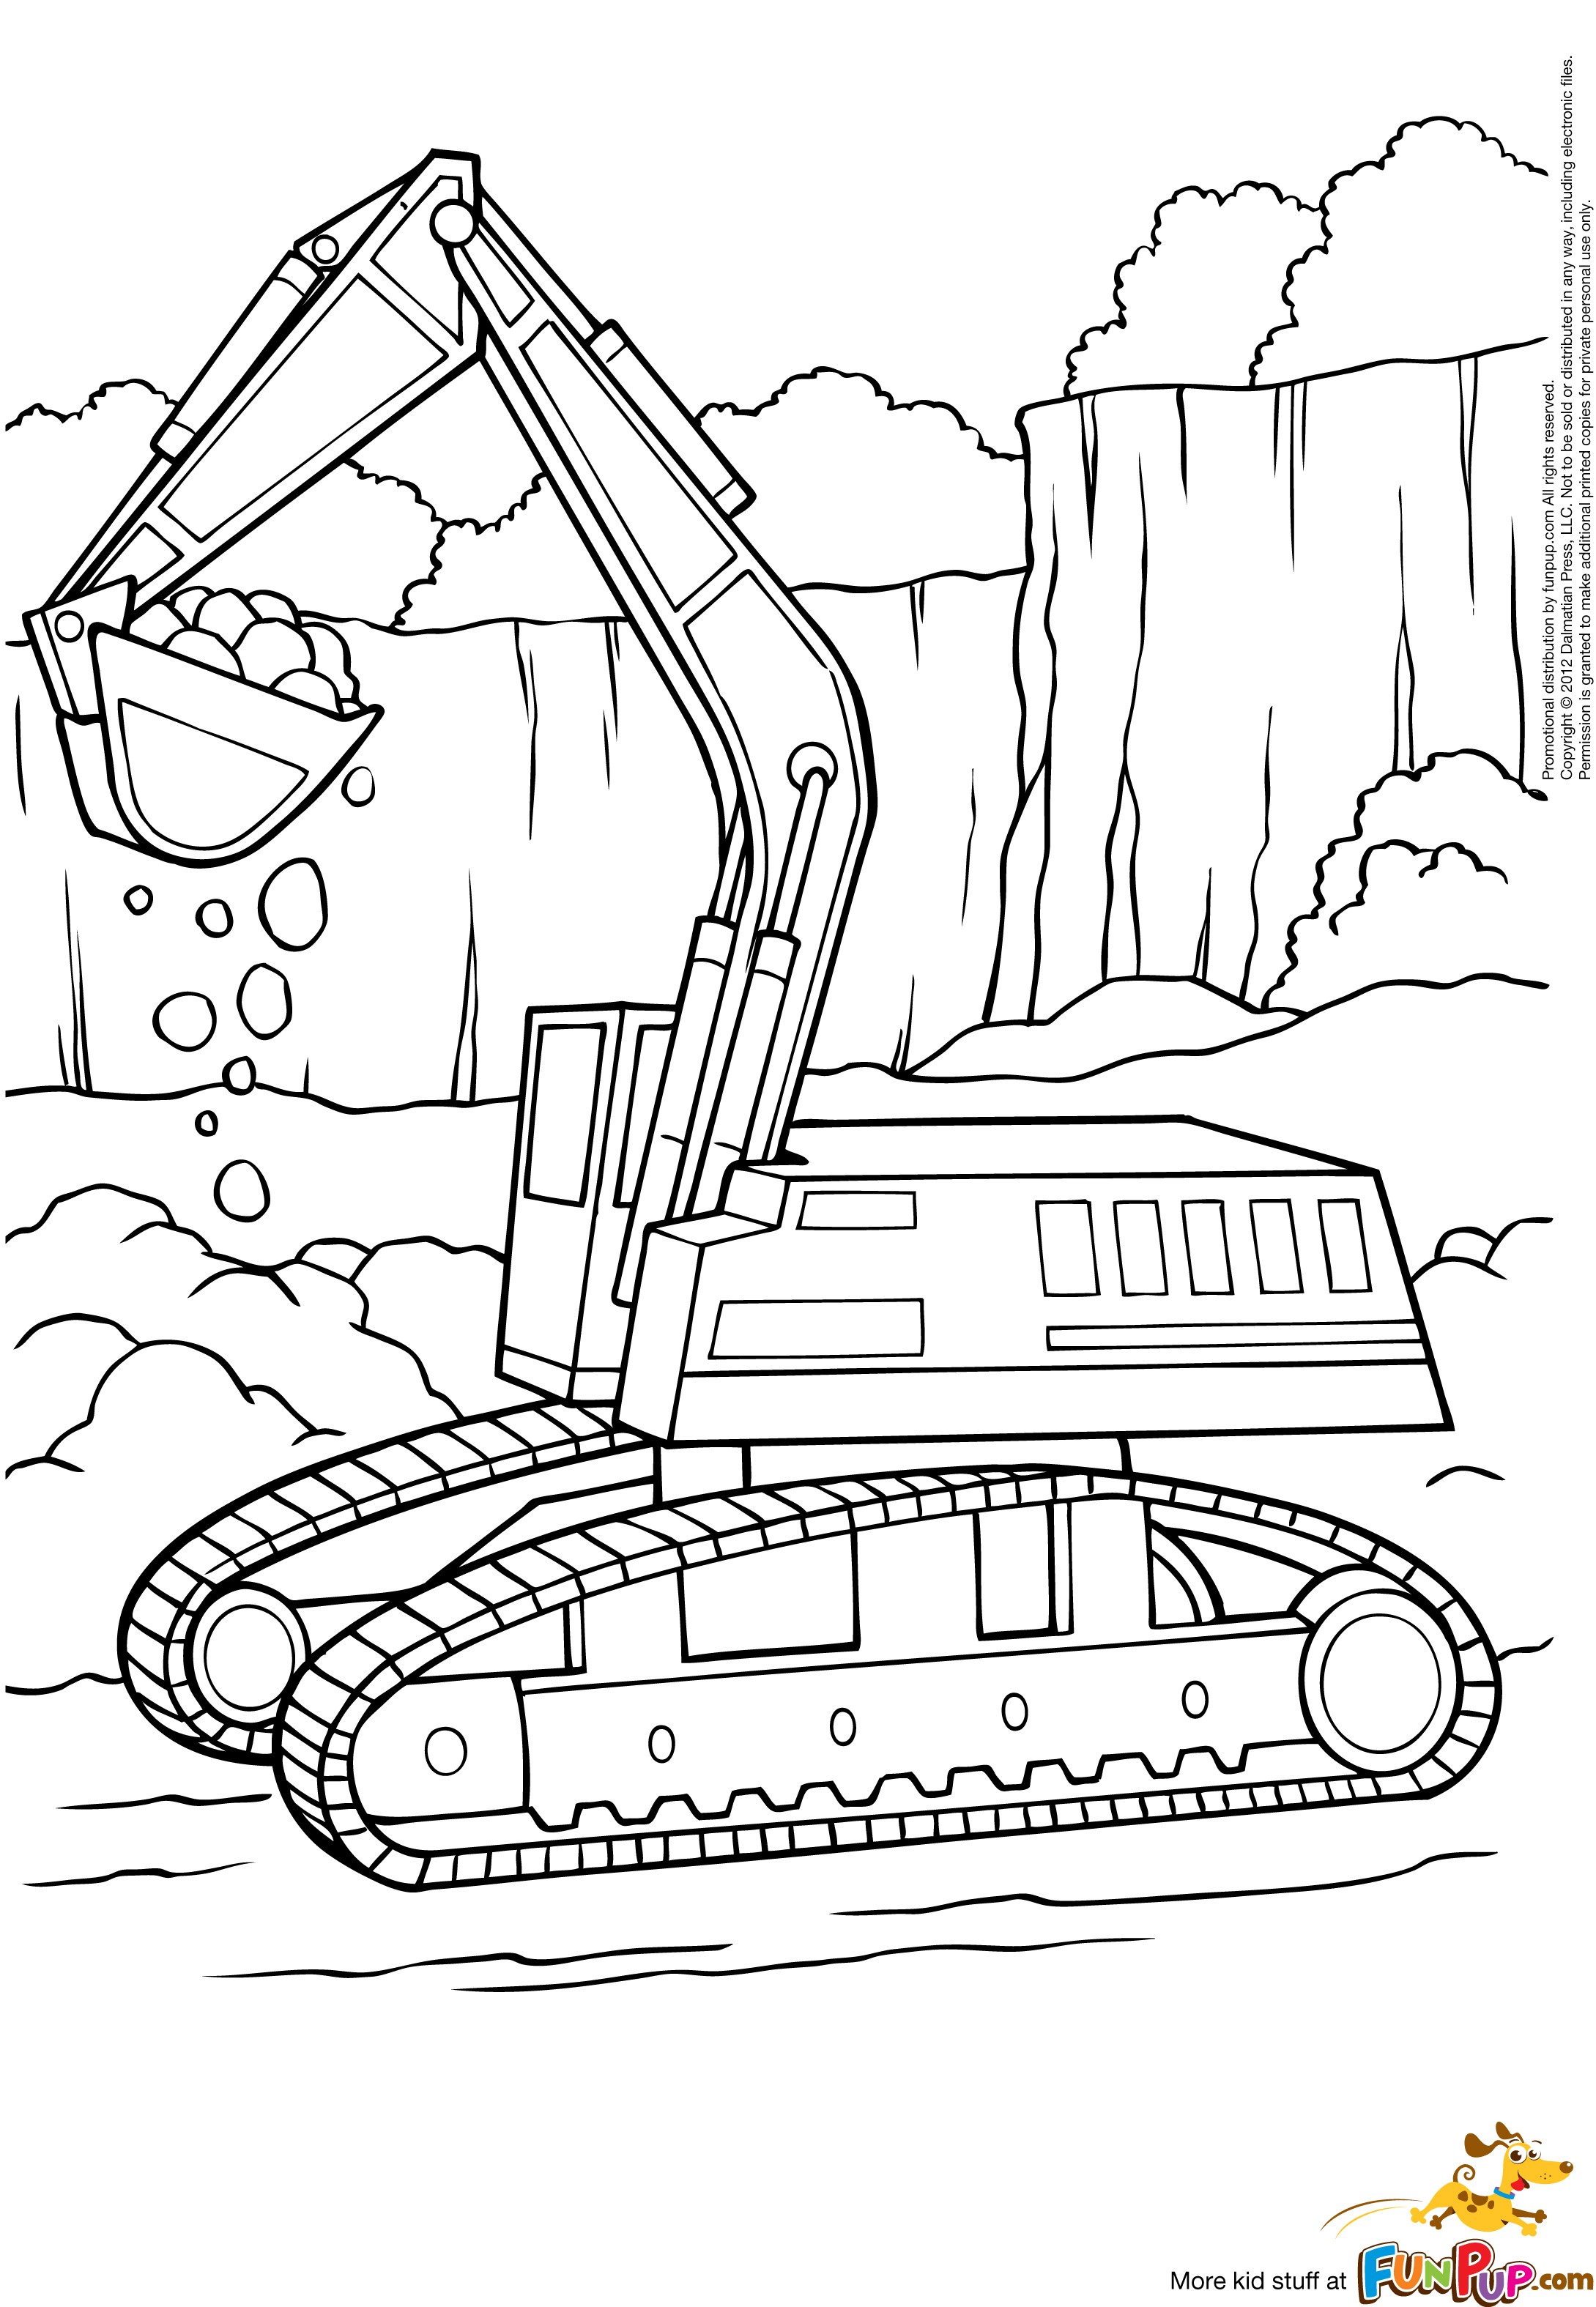 Construction machinery Coloring pages Collection